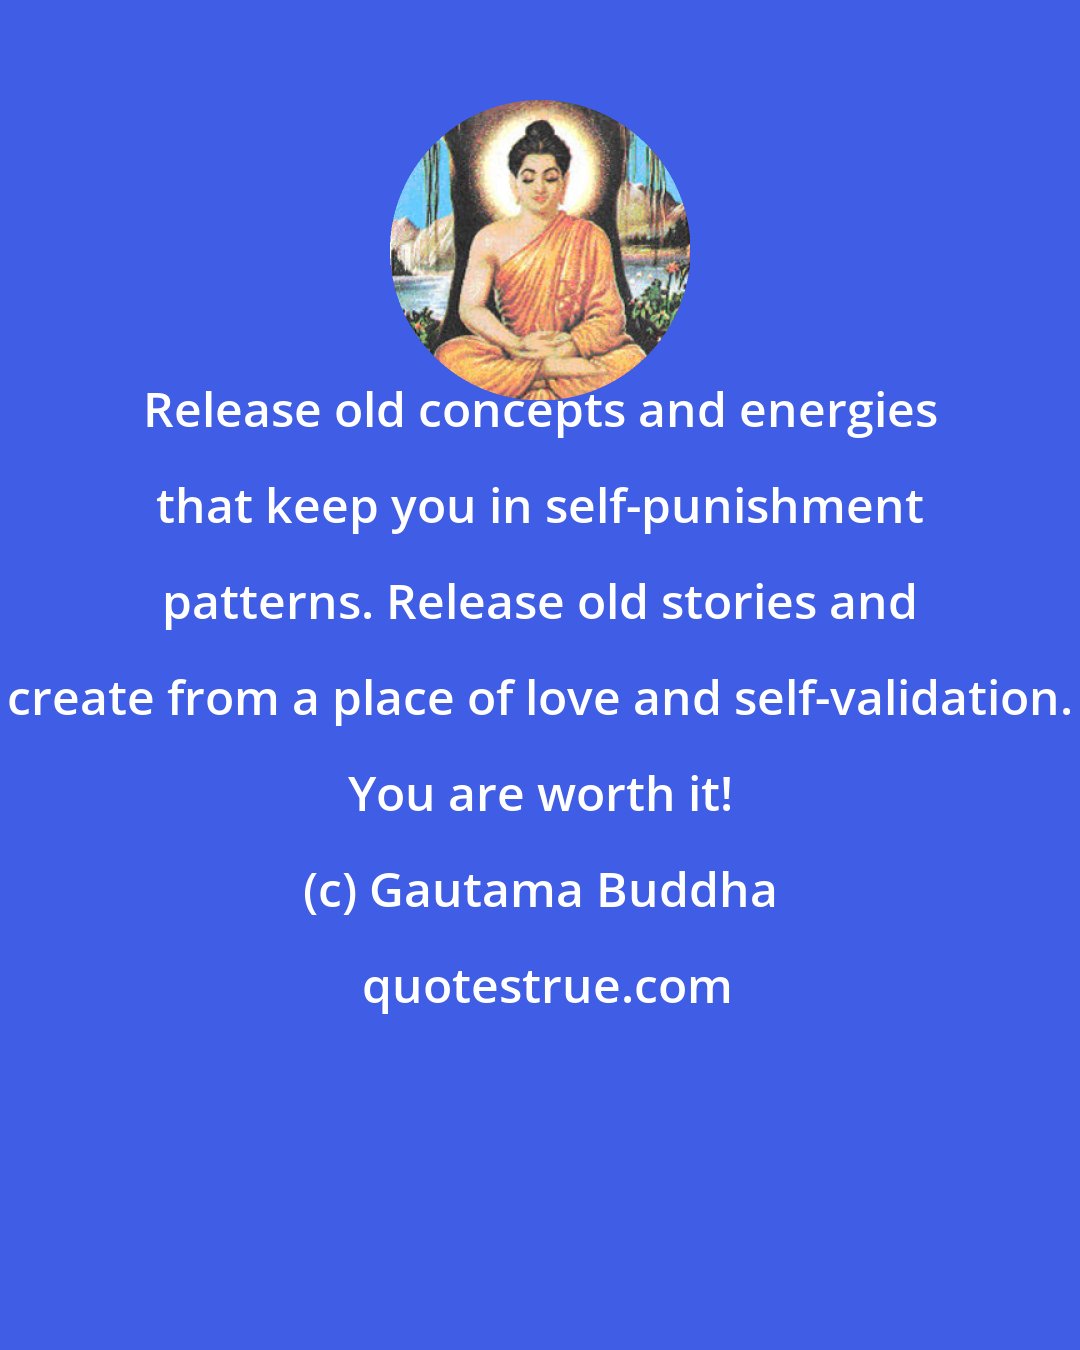 Gautama Buddha: Release old concepts and energies that keep you in self-punishment patterns. Release old stories and create from a place of love and self-validation. You are worth it!